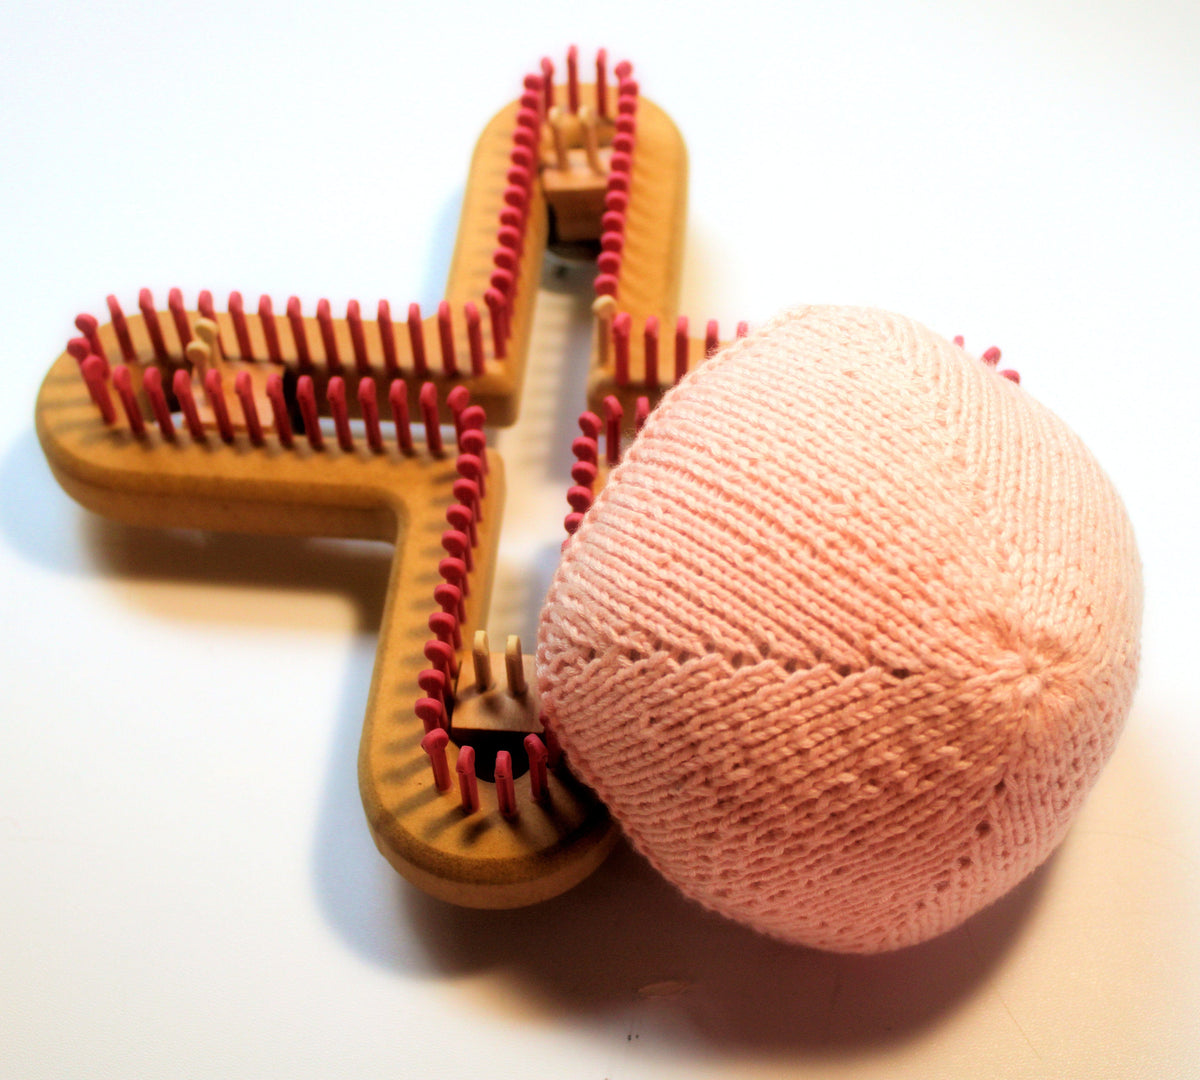 What will you create with LoomBot? Knit like a pro with the simple